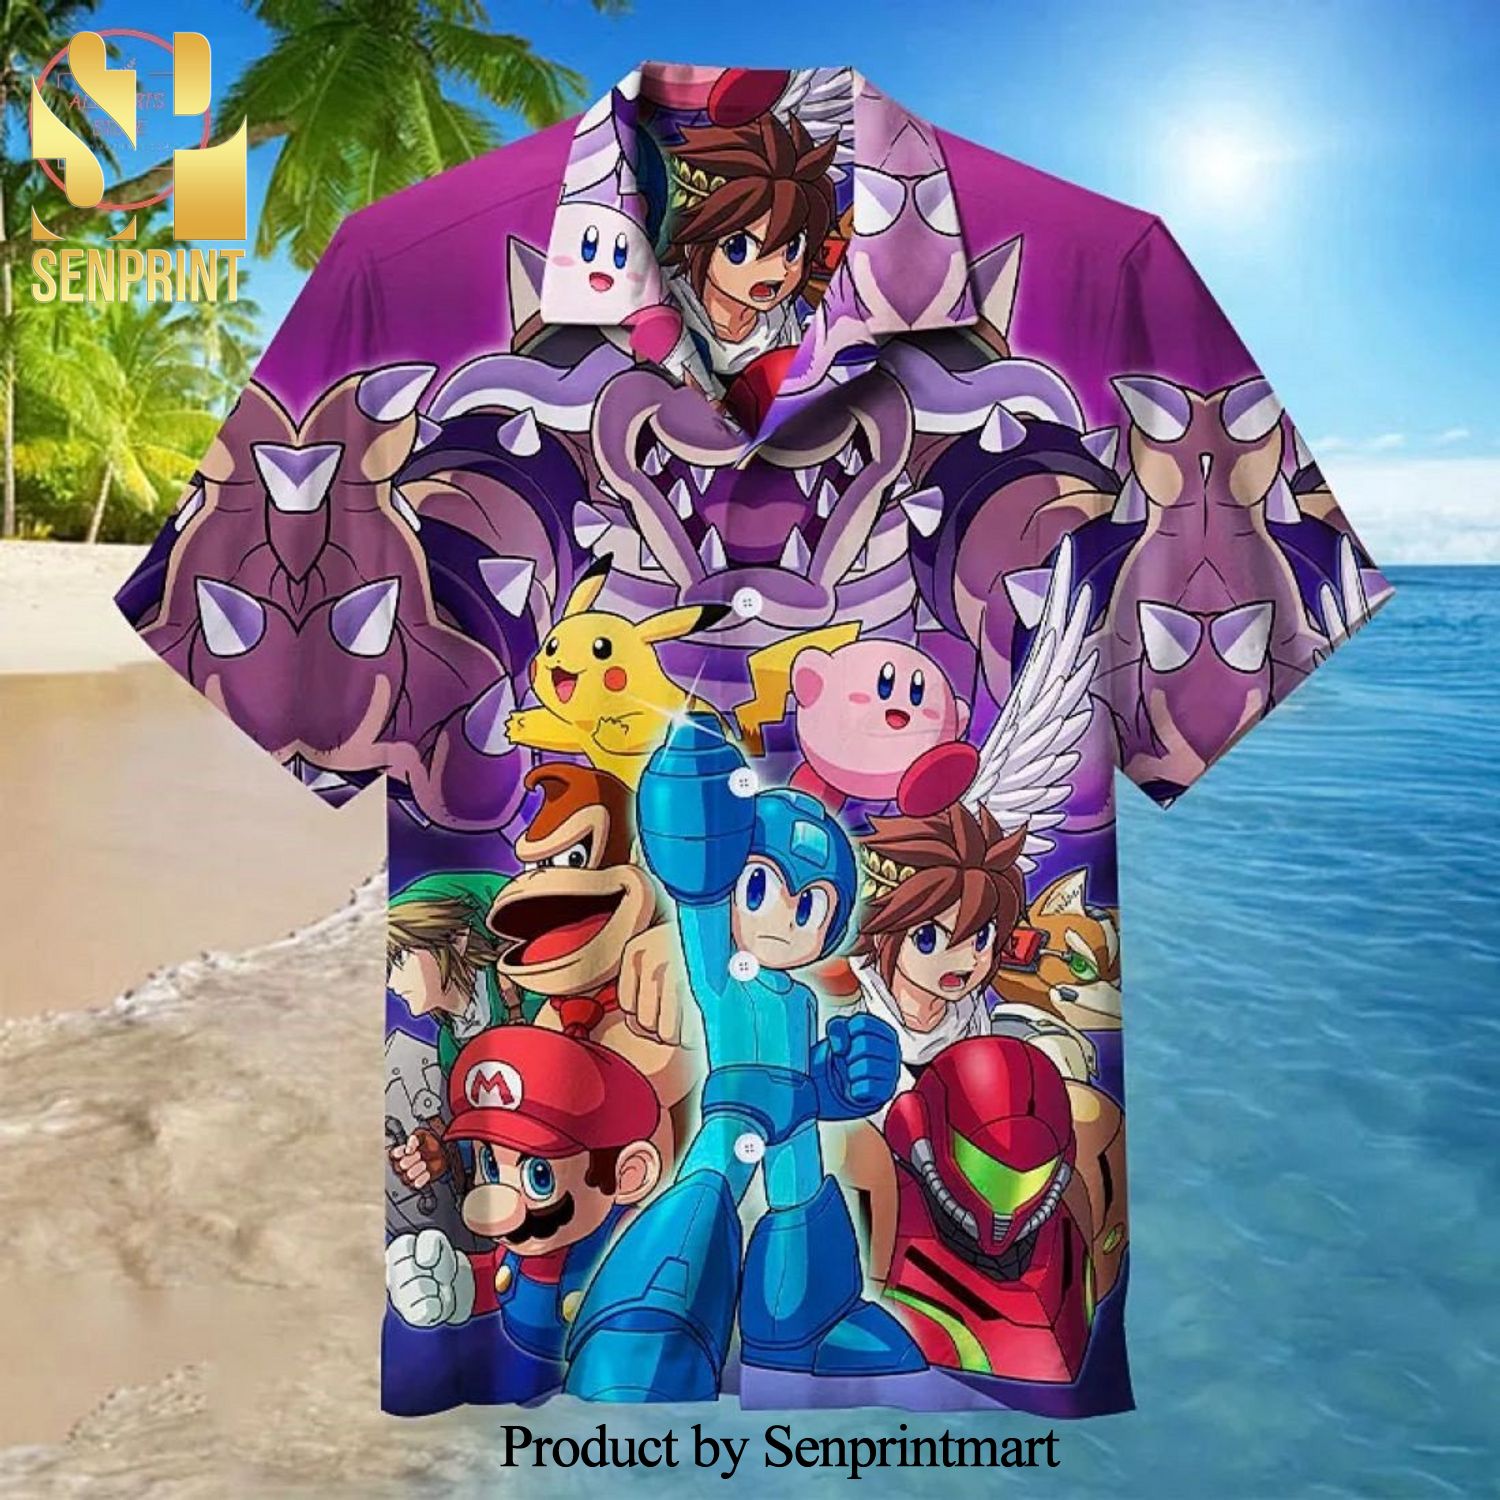 What does a Hawaiian shirt look like and how would you look with a Pokemon Hawaiian shirt?